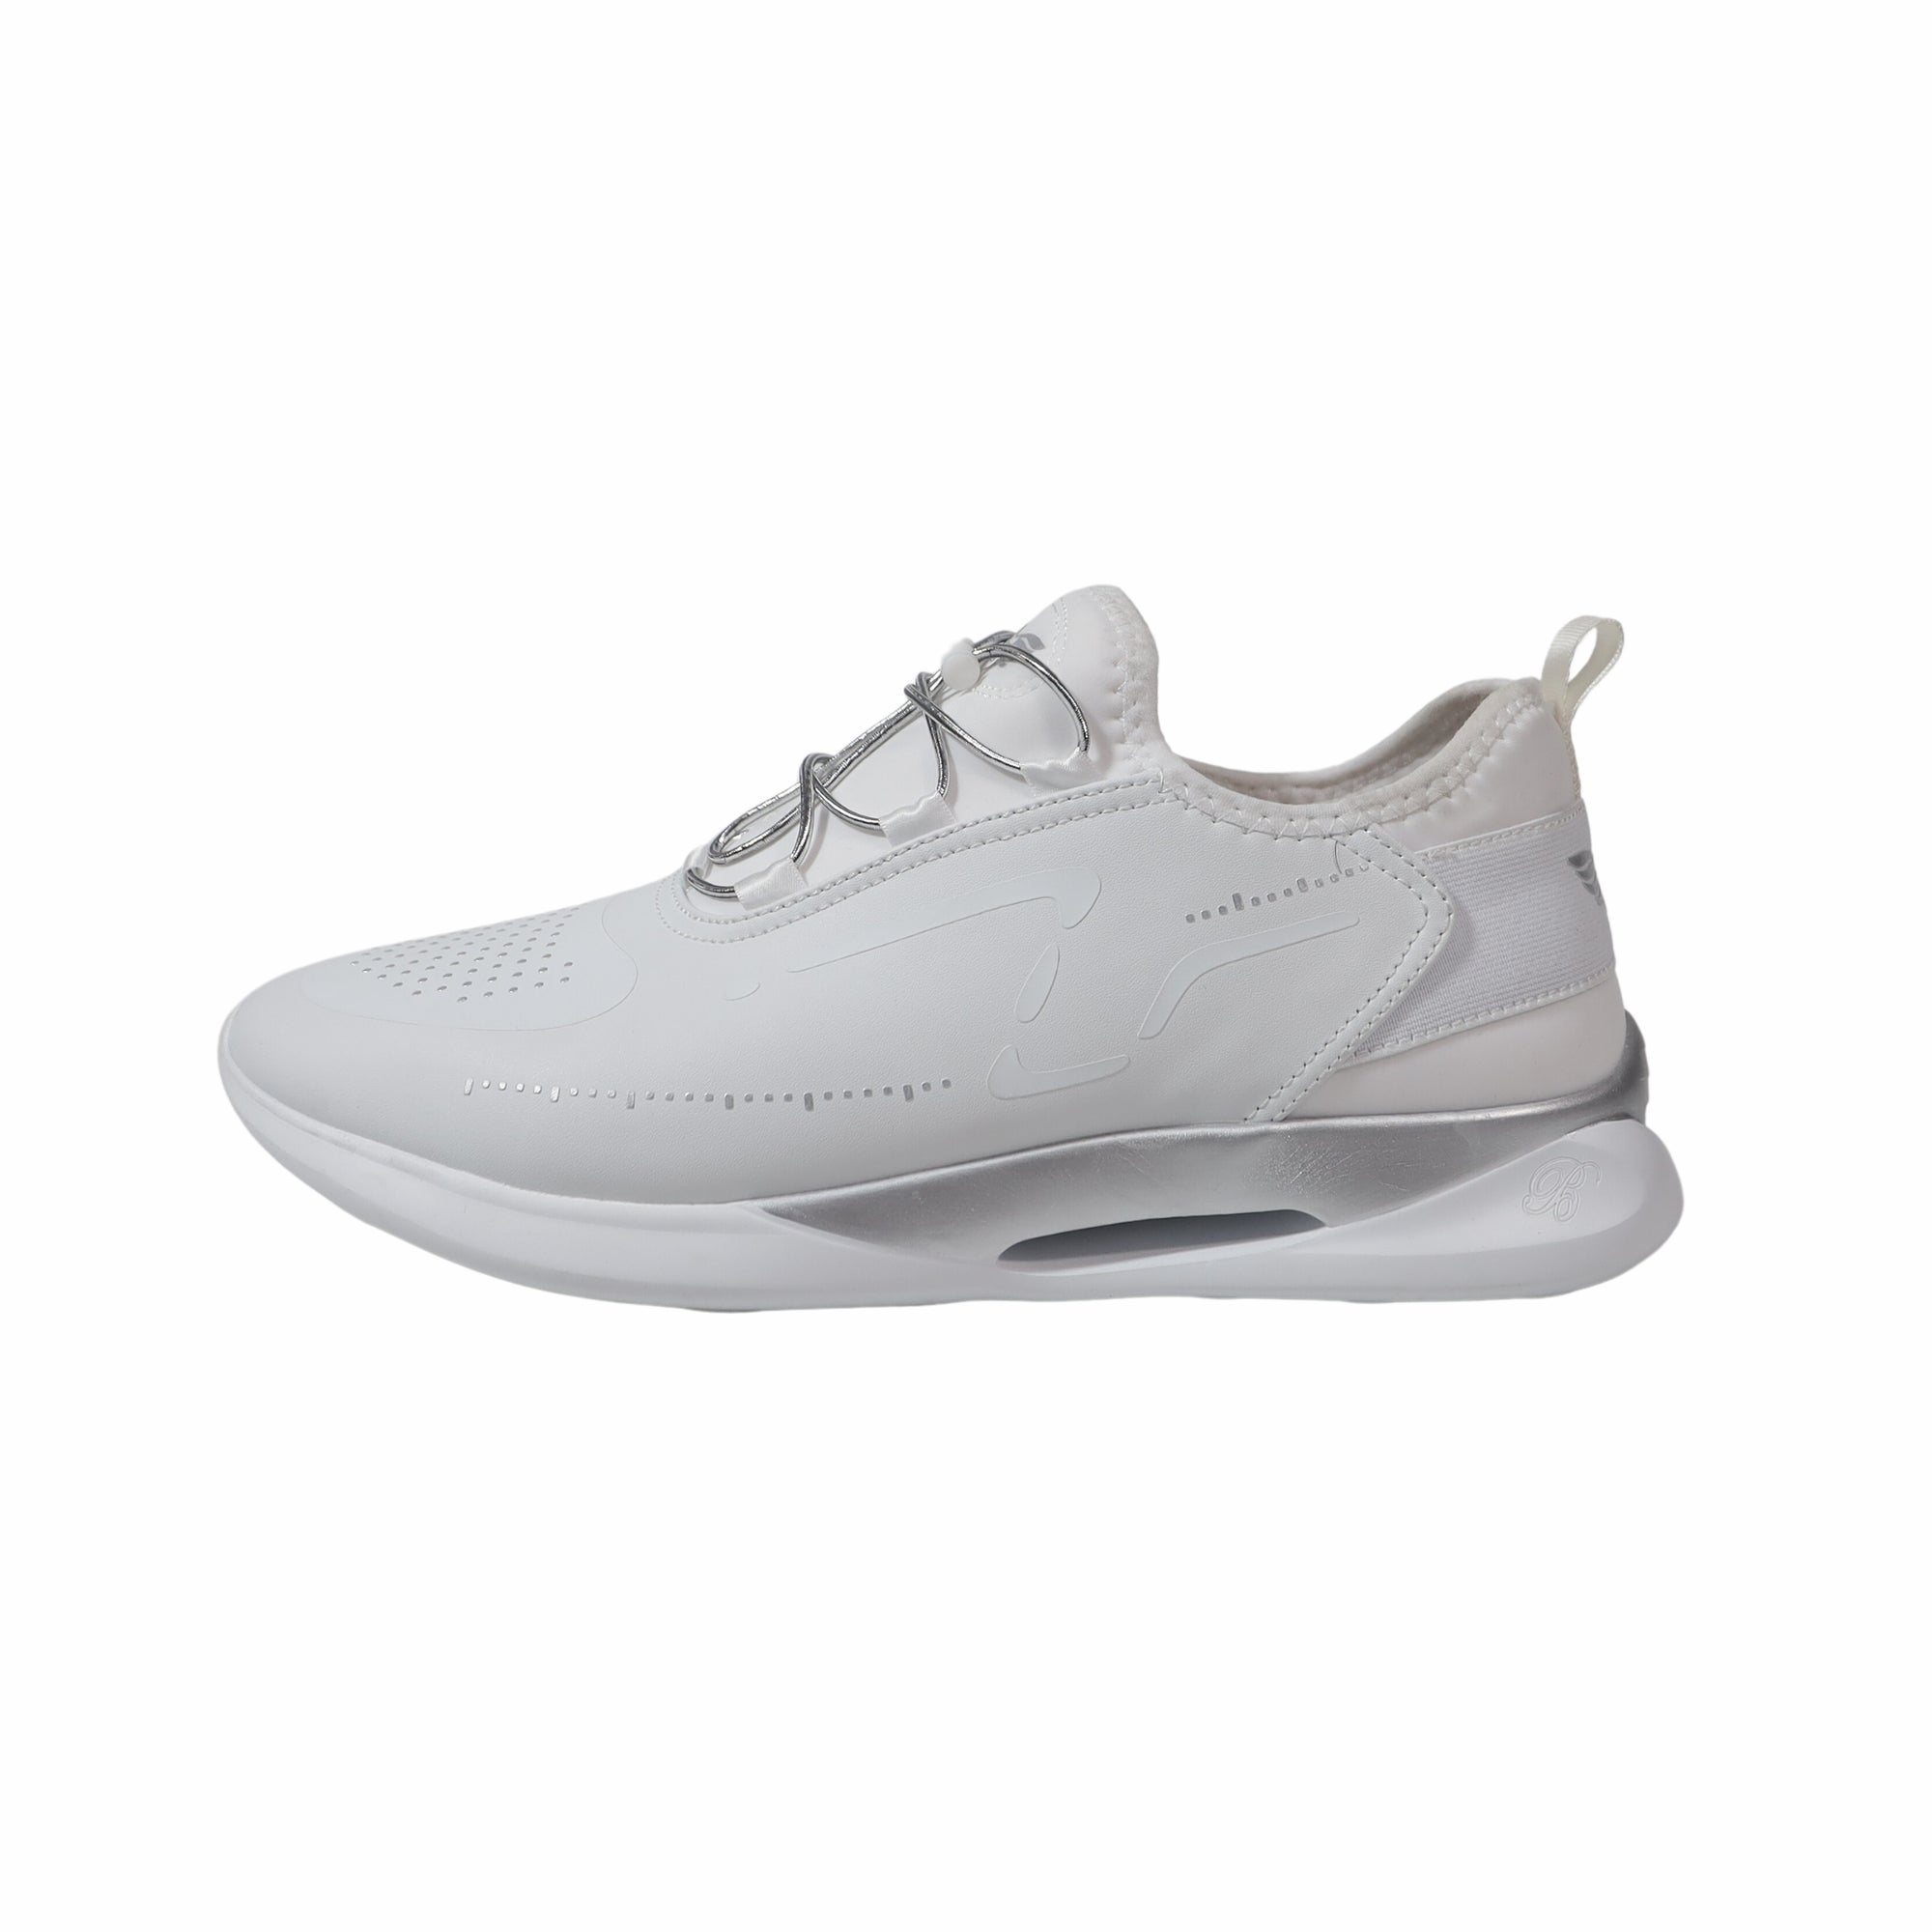 Airloom 2 Leather Sneaker